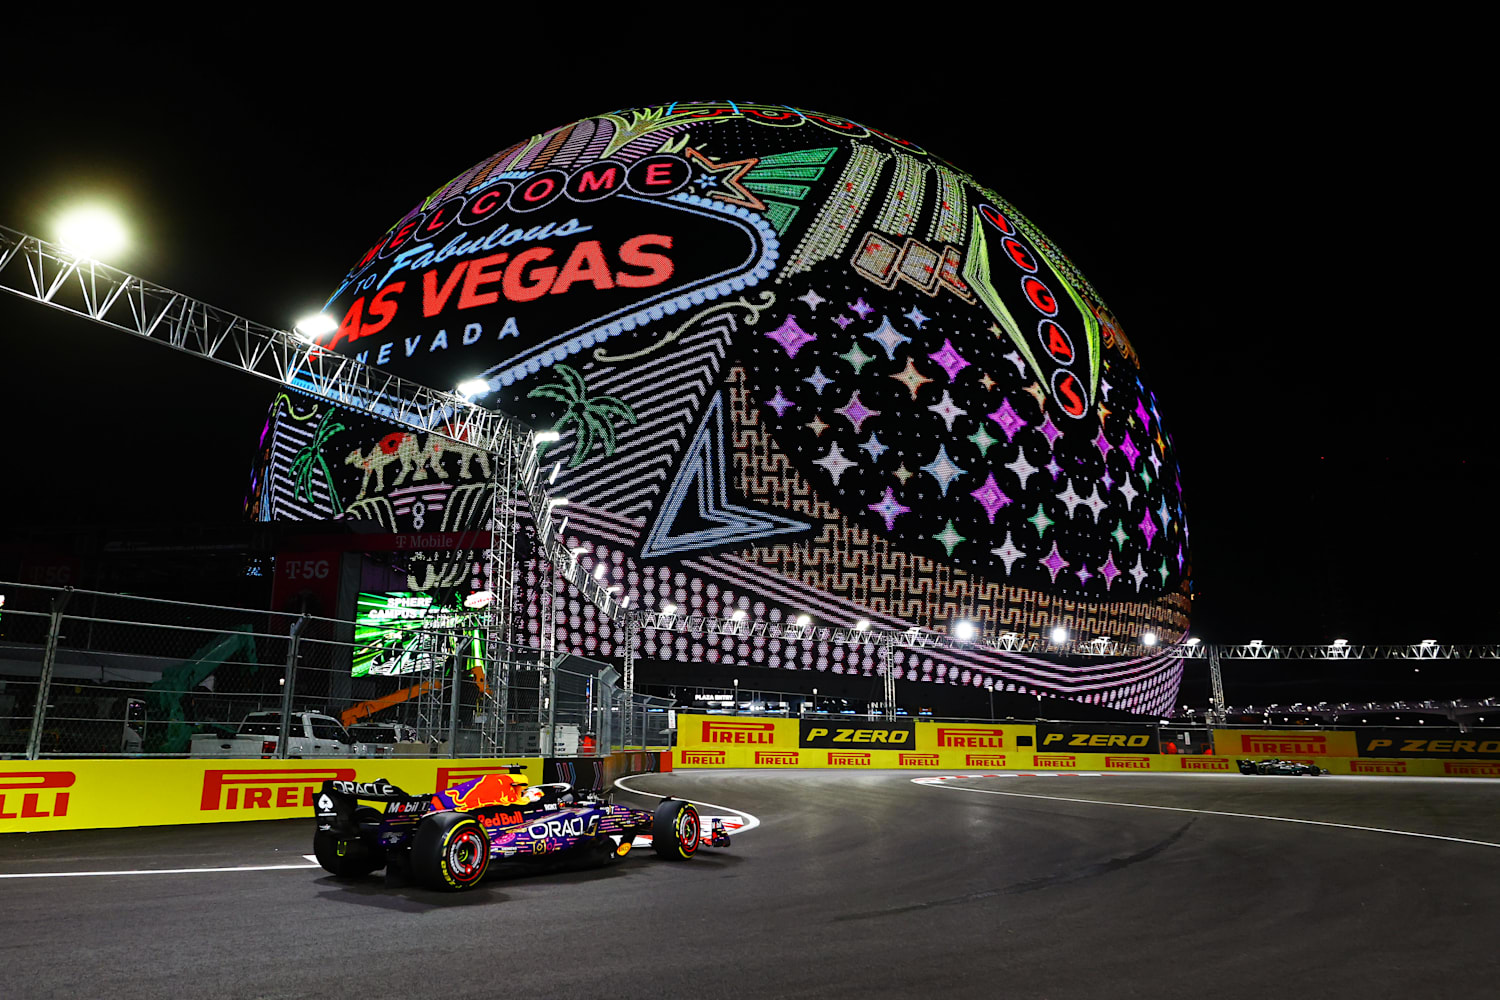 Formula 1 Las Vegas Grand Prix: Max verstappen As a real racer the show shouldn't really matter